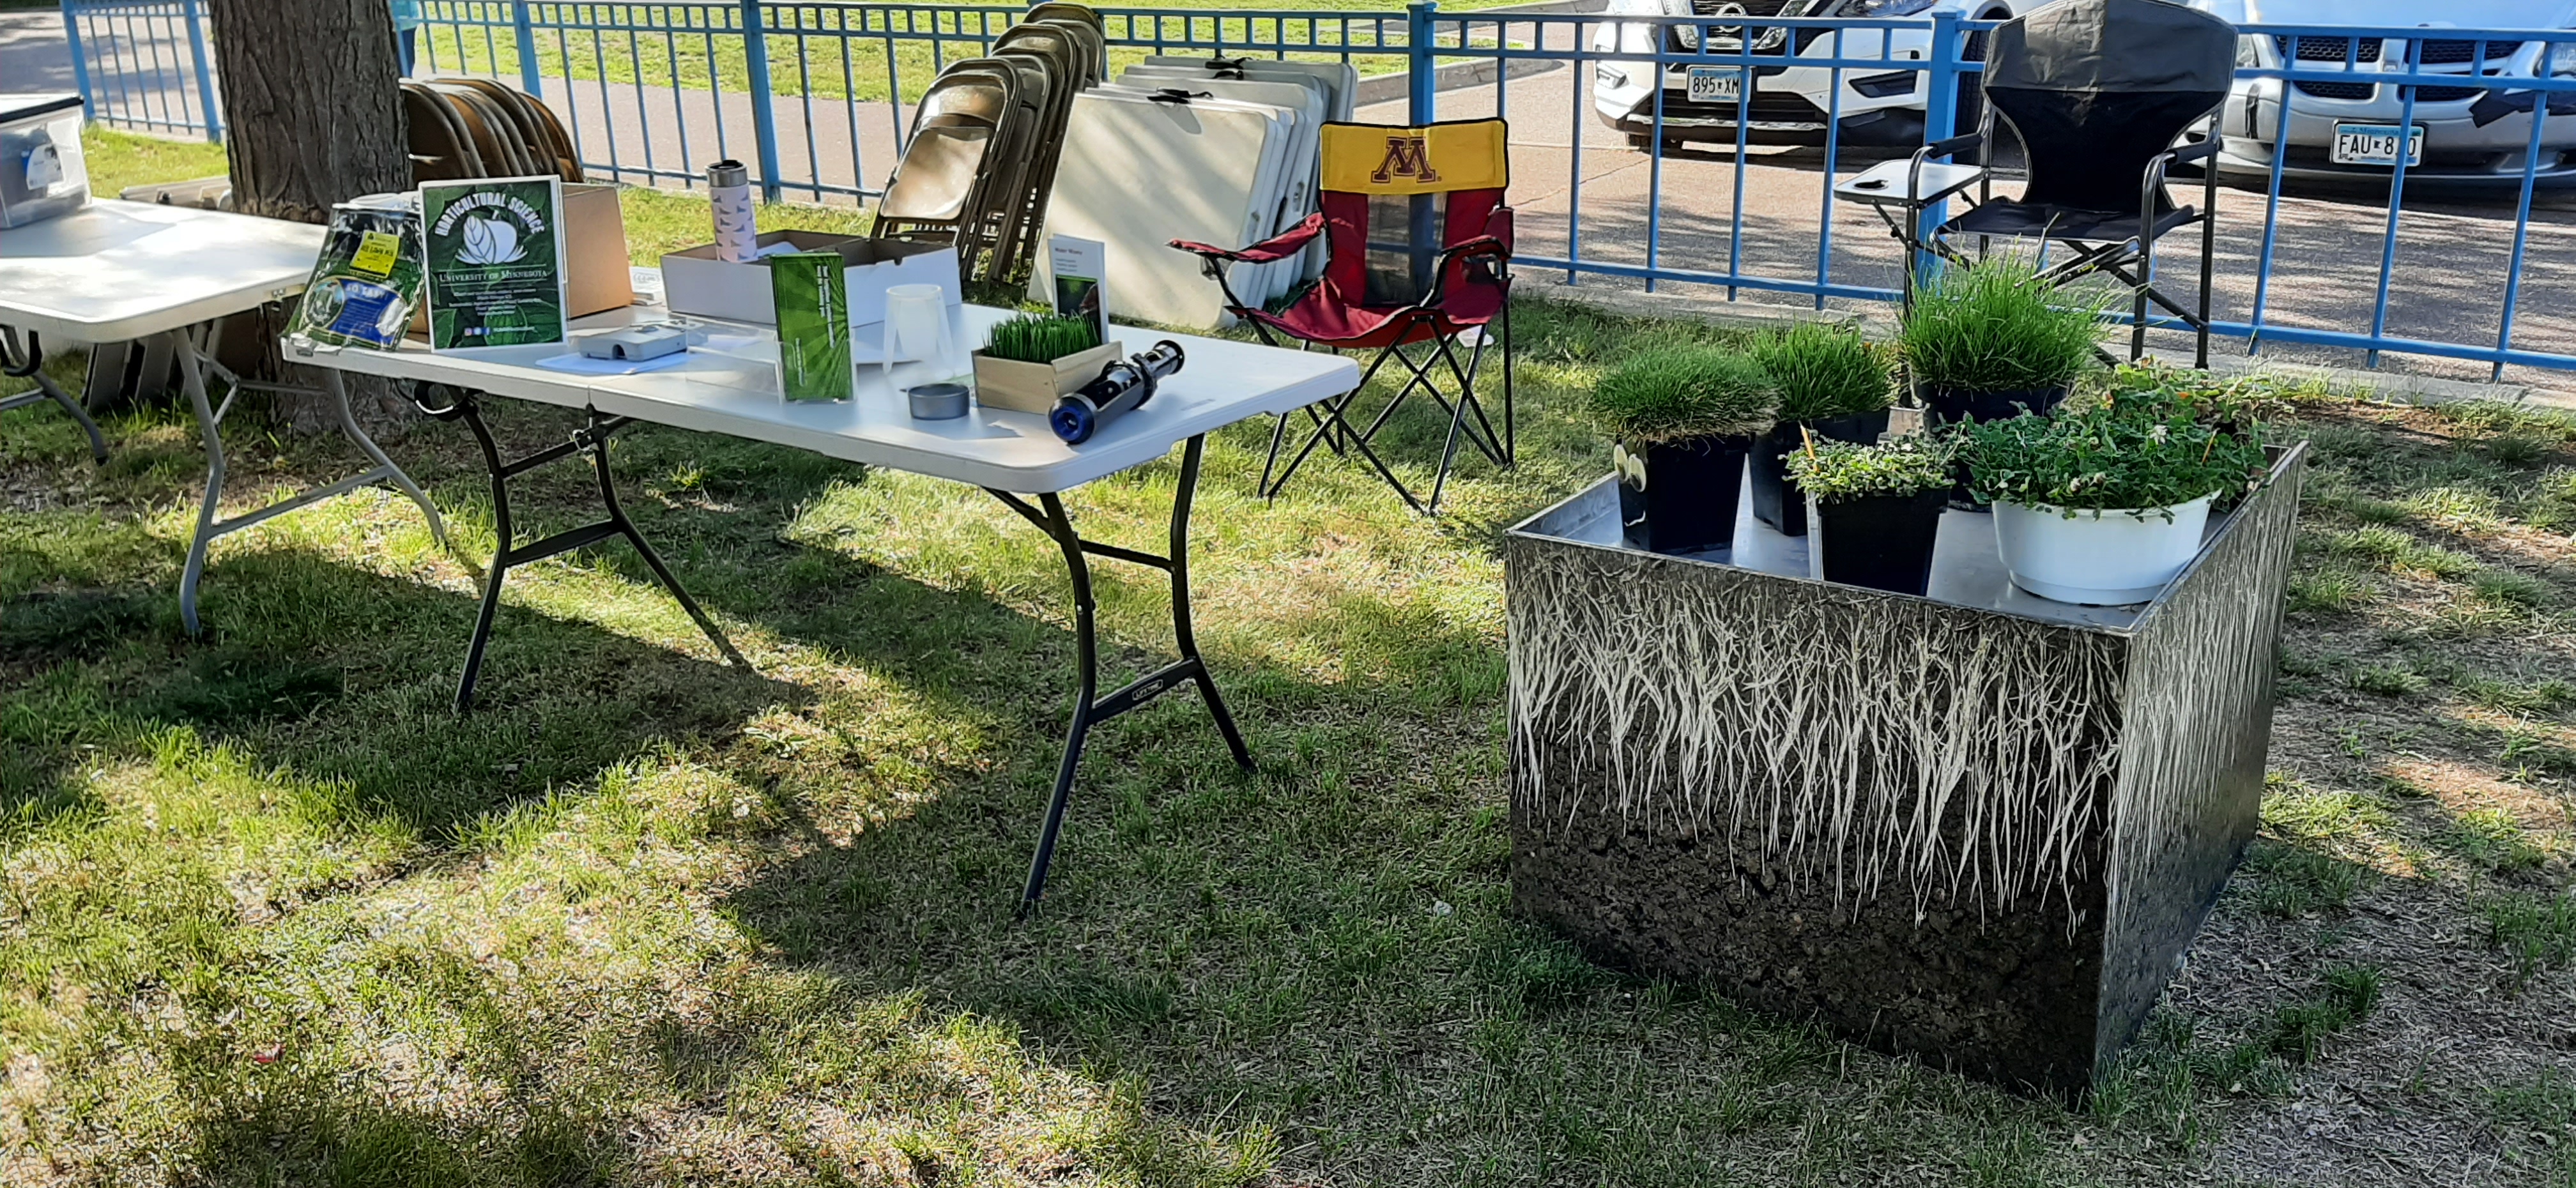 a display of turfgrass educational materials outside at an event